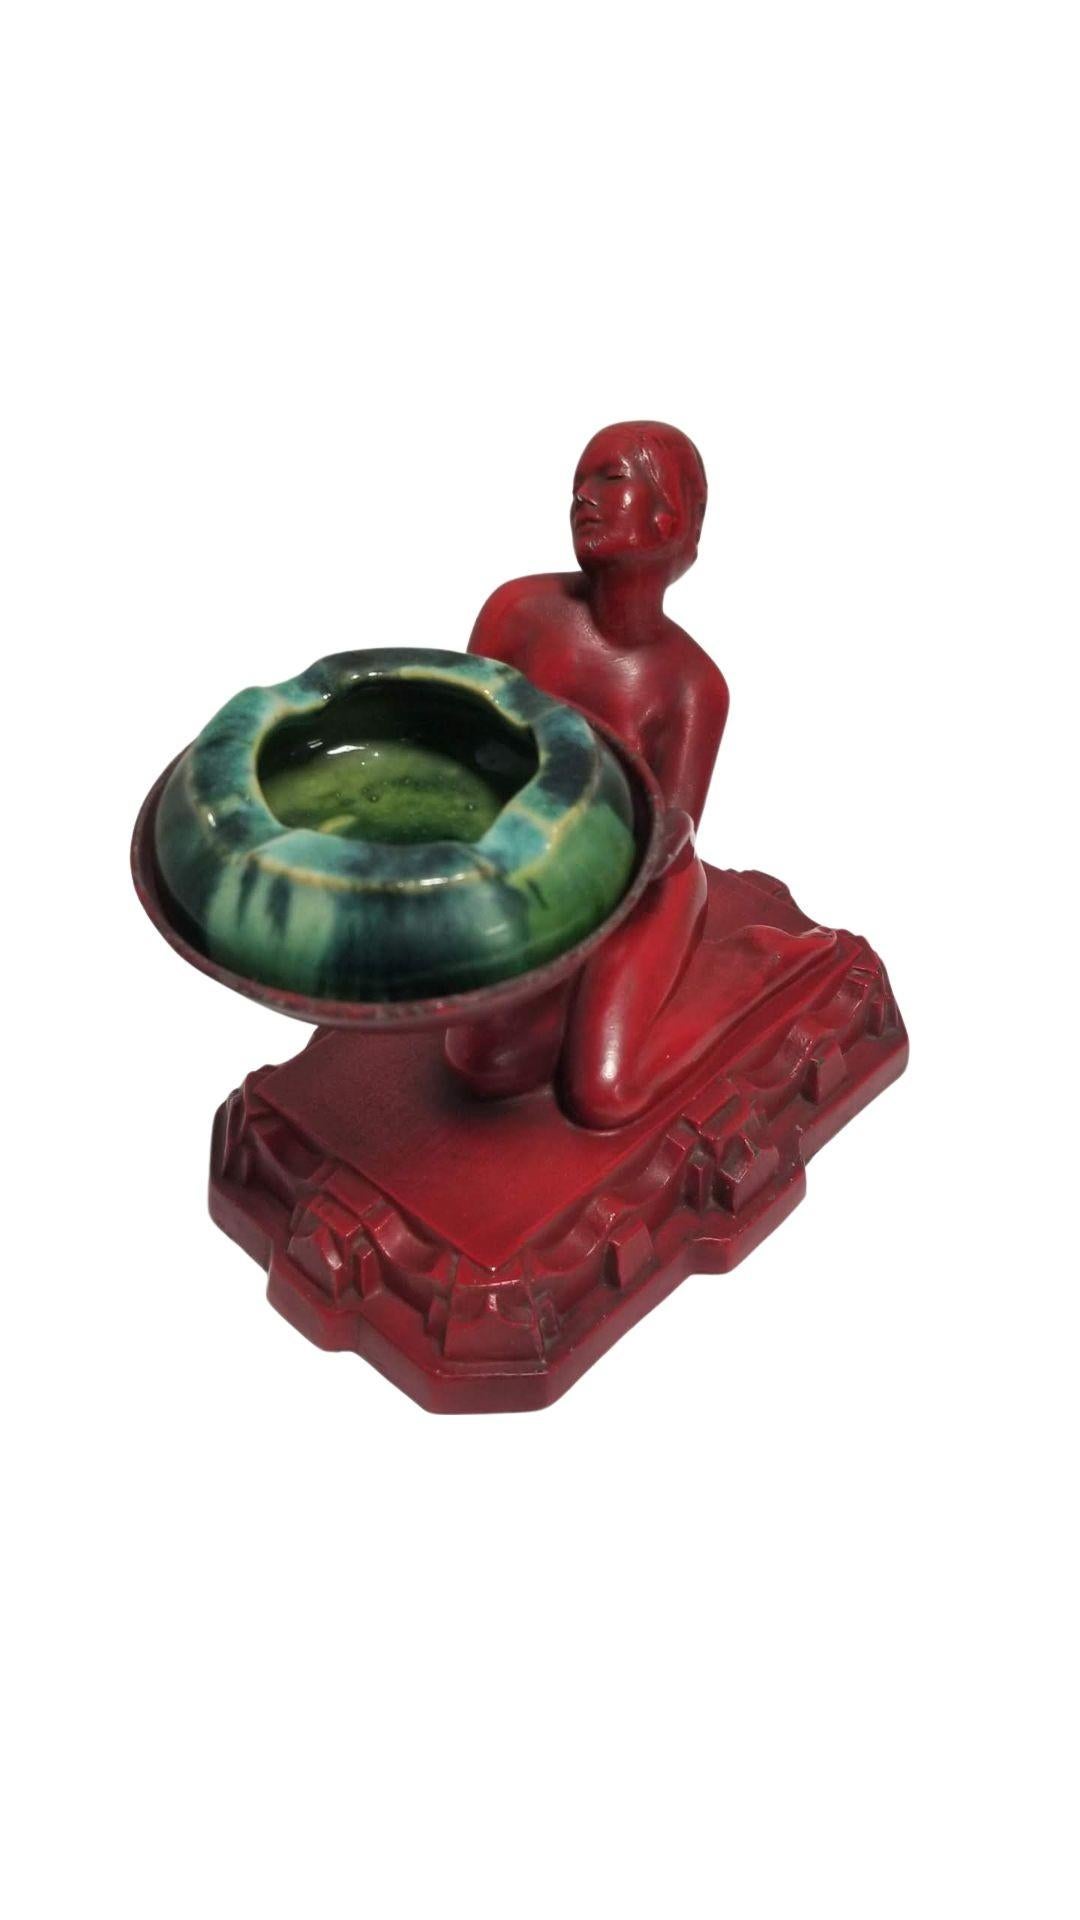 1920s Art Deco ashtray or ring holder by Nuart featuring a nude female figurine offering an ashtray in an oriental red finish with green ceramic Brush McCoy pottery ashtray.

Nuart specialized in crafting decorative household items in the Art Deco